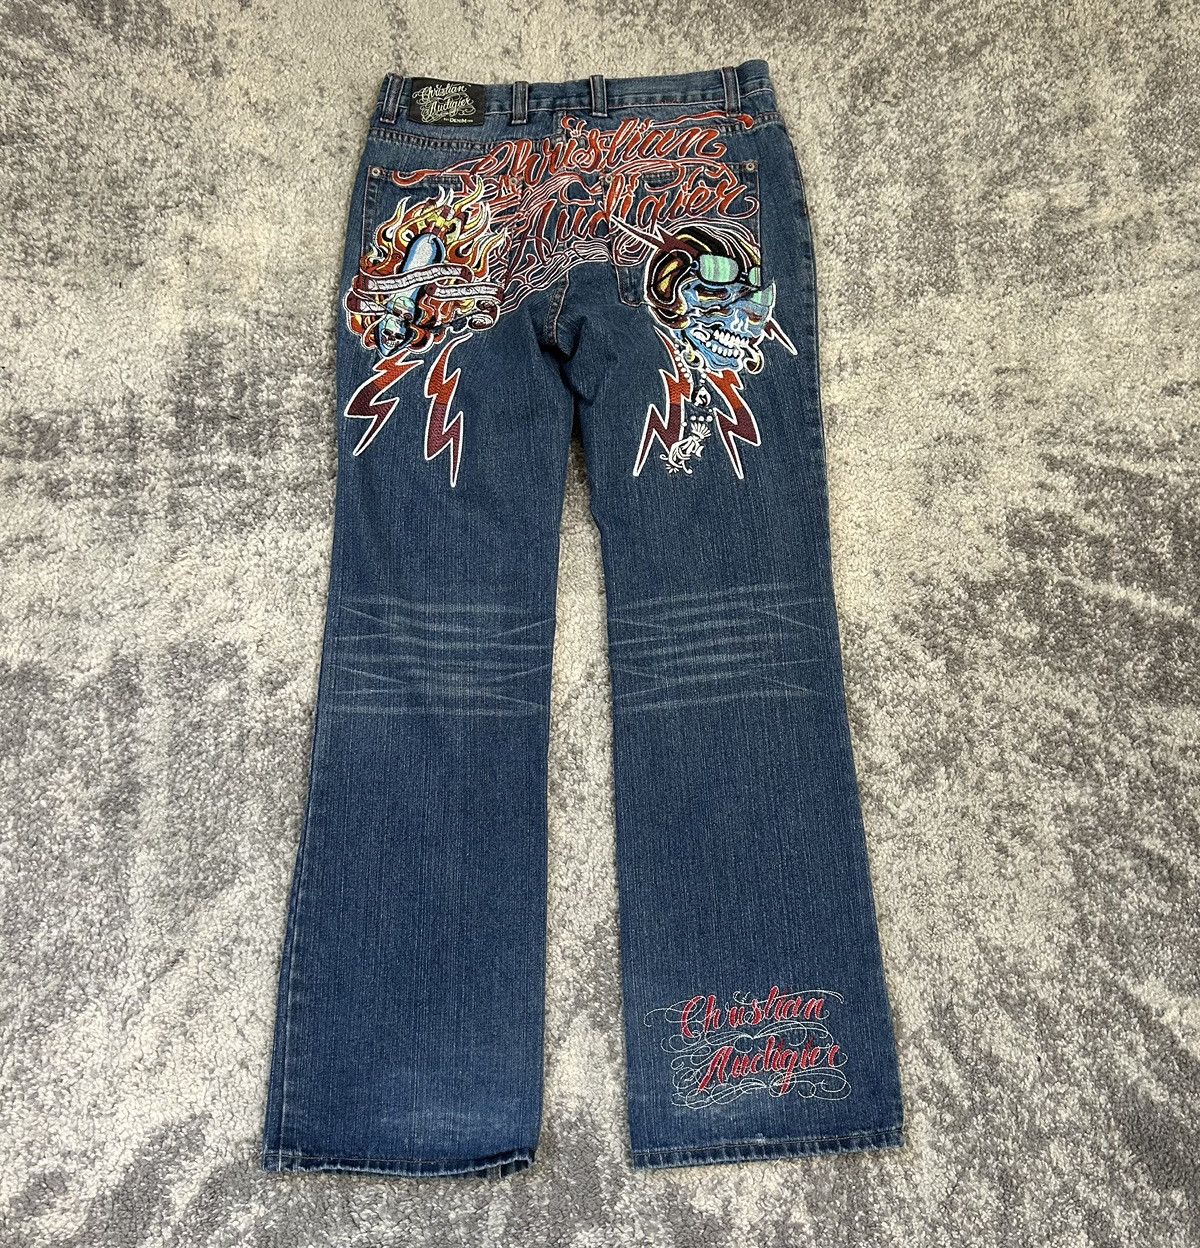 Christian Audigier 2000s Christian Audigier Embroidered Jeans Size US 34 / EU 50 - 1 Preview